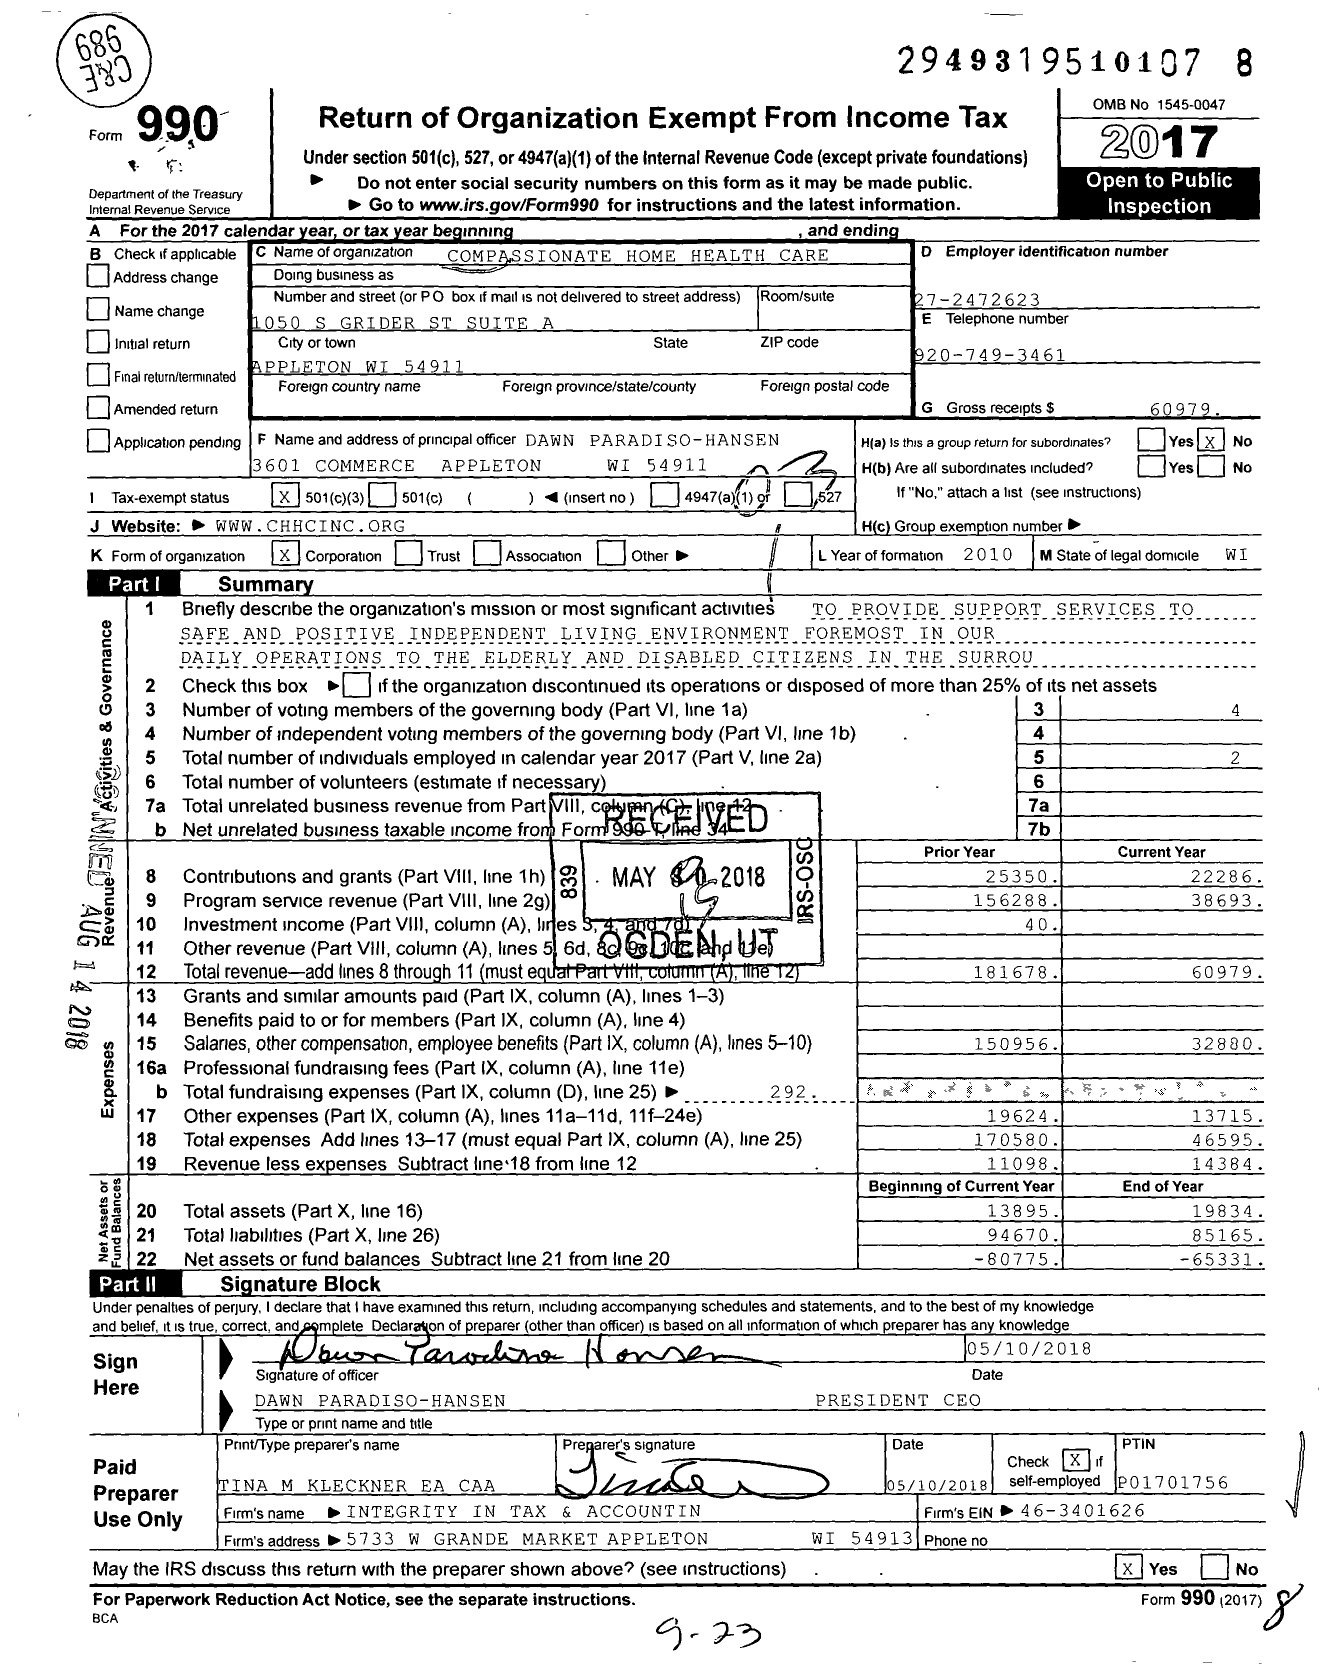 Image of first page of 2017 Form 990 for Compassionate Home Health Care